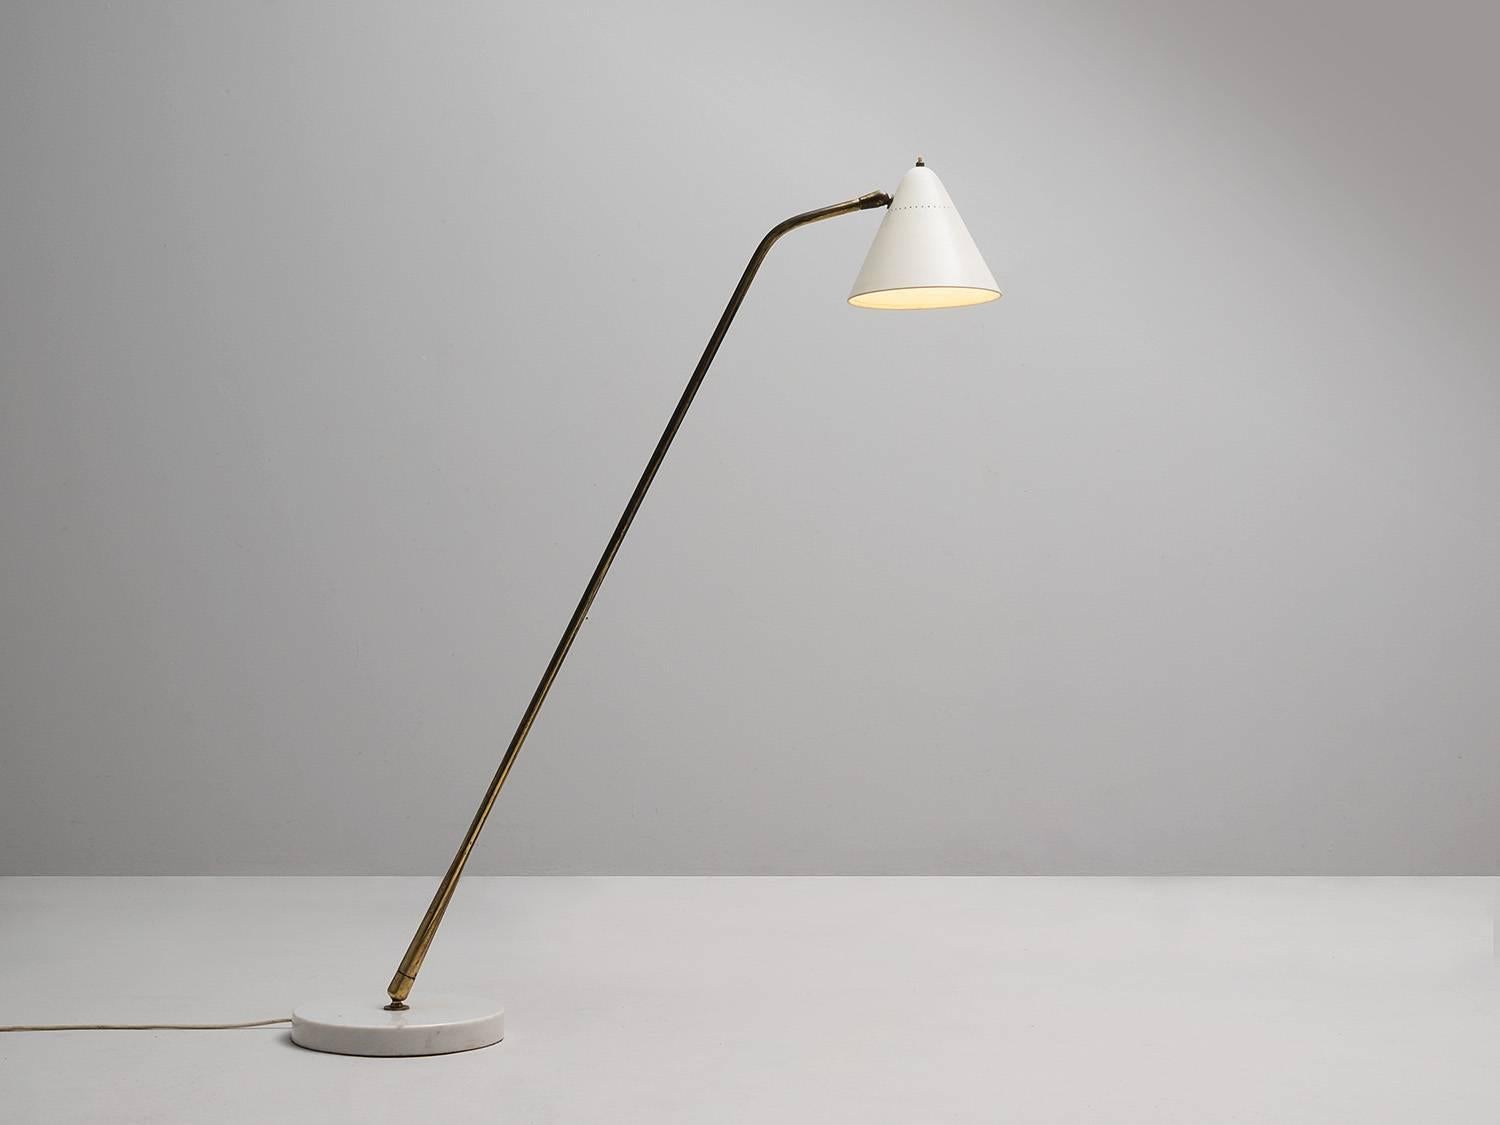 Giuseppe Ostuni for O-Luce, floor lamp, brass, metal, marble, Italy, 1950s.

Wonderful floor lamp in nicely aged brass and white marble, with a beautiful original off-white shade. The bras stem is adjustable in angle, as well as the shade. The